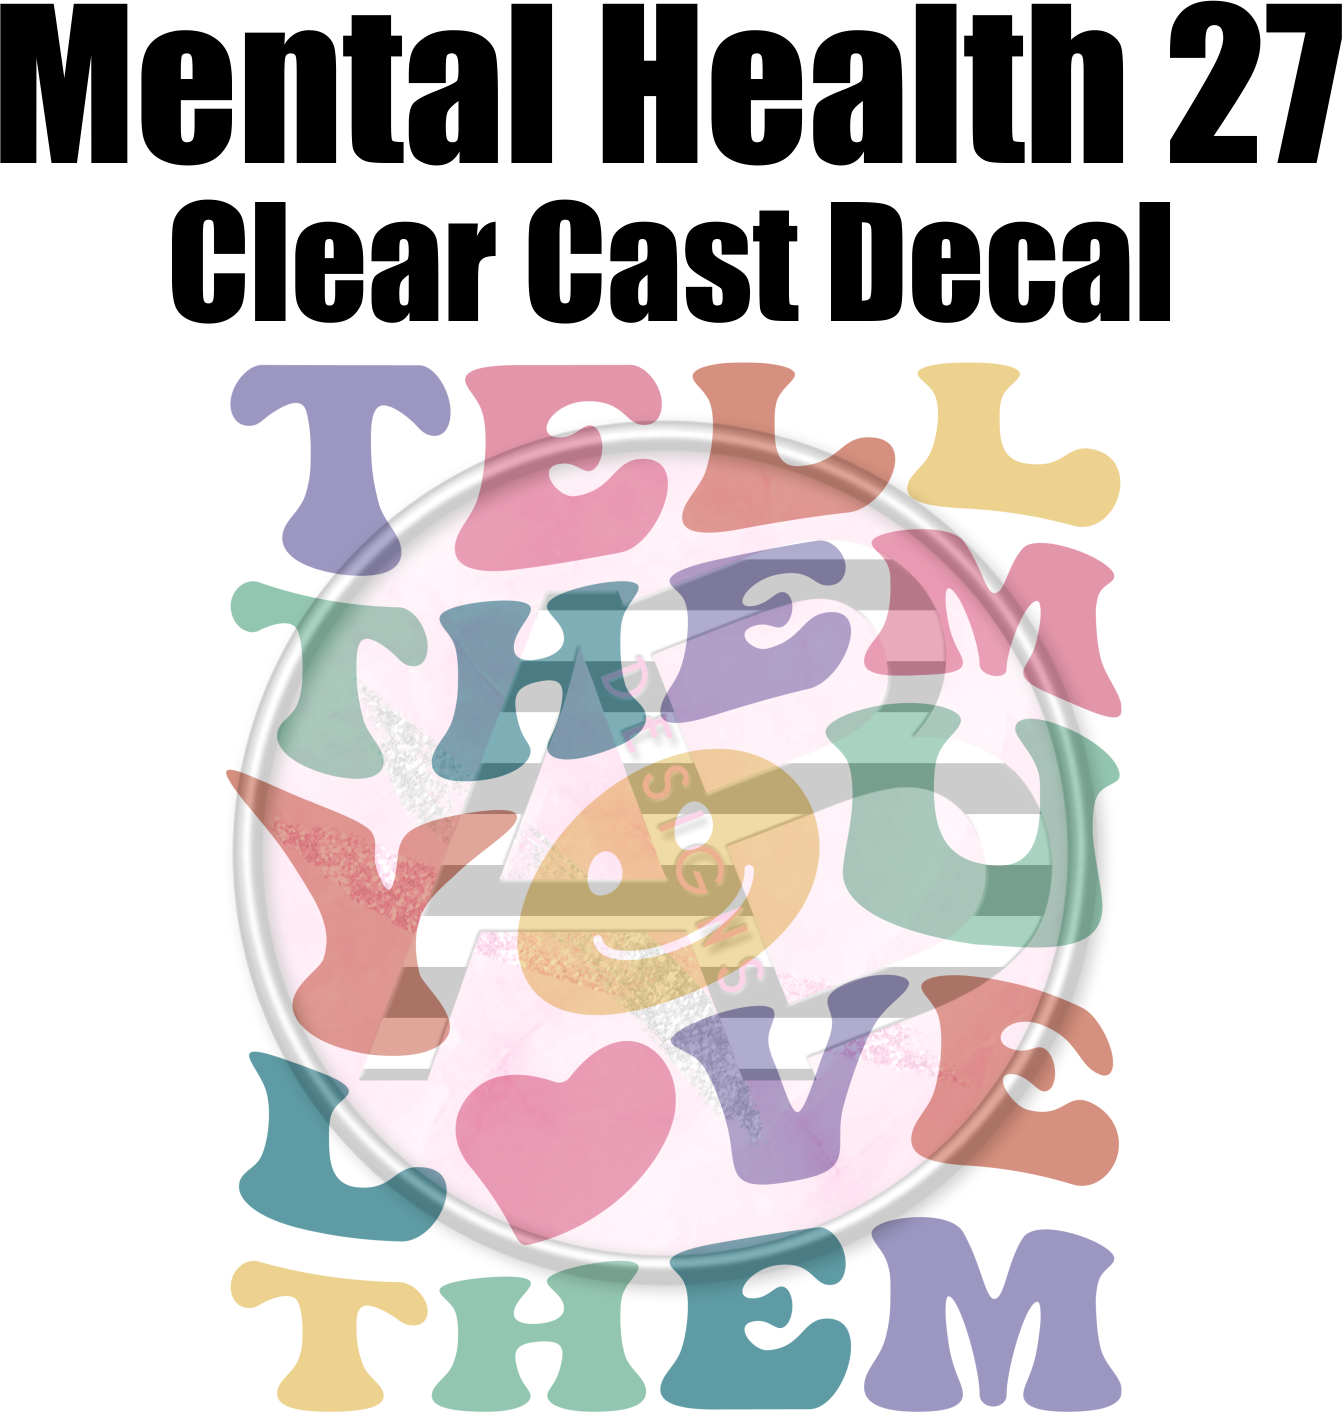 Mental Health 27 - Clear Cast Decal - 320